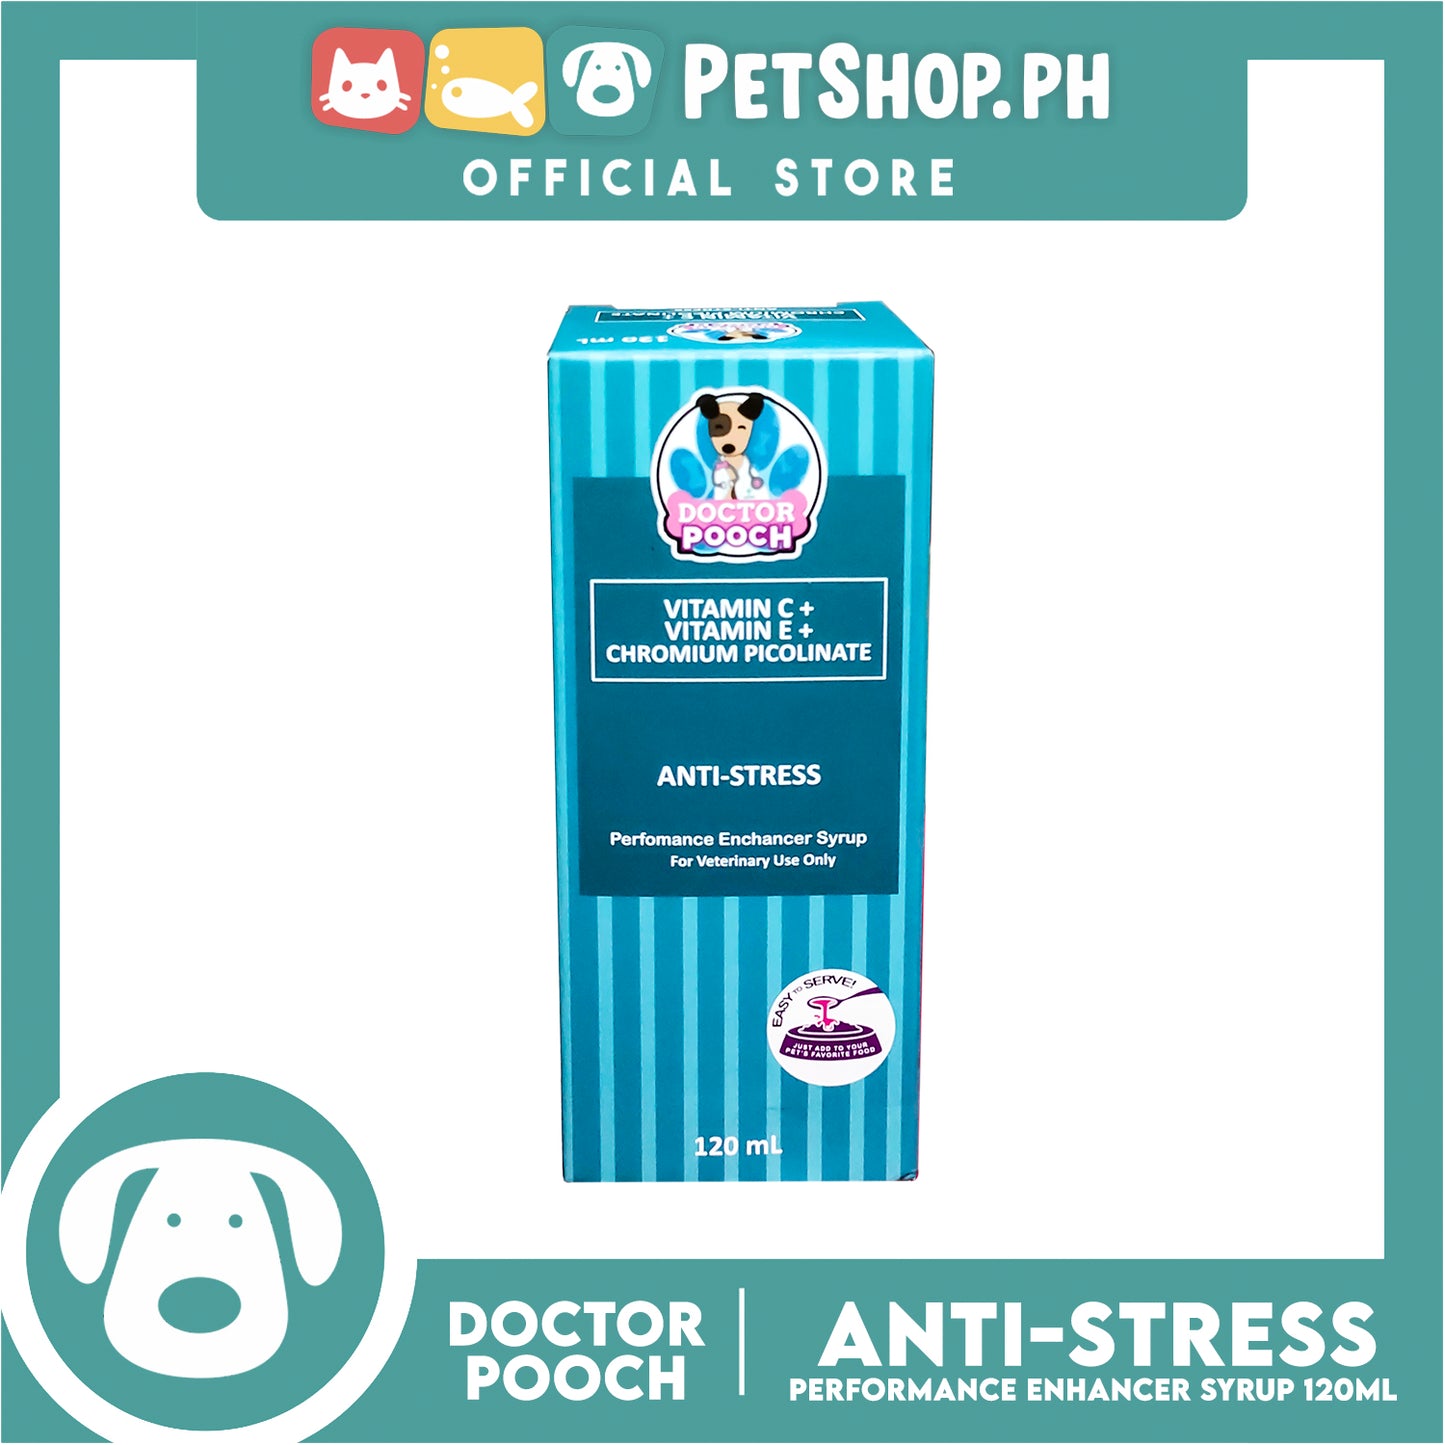 Doctor Pooch Anti Stress Multivitamins 120ml Vitamin C + Vitamin E + Chromium Picolinate For Puppies And Adult Dogs